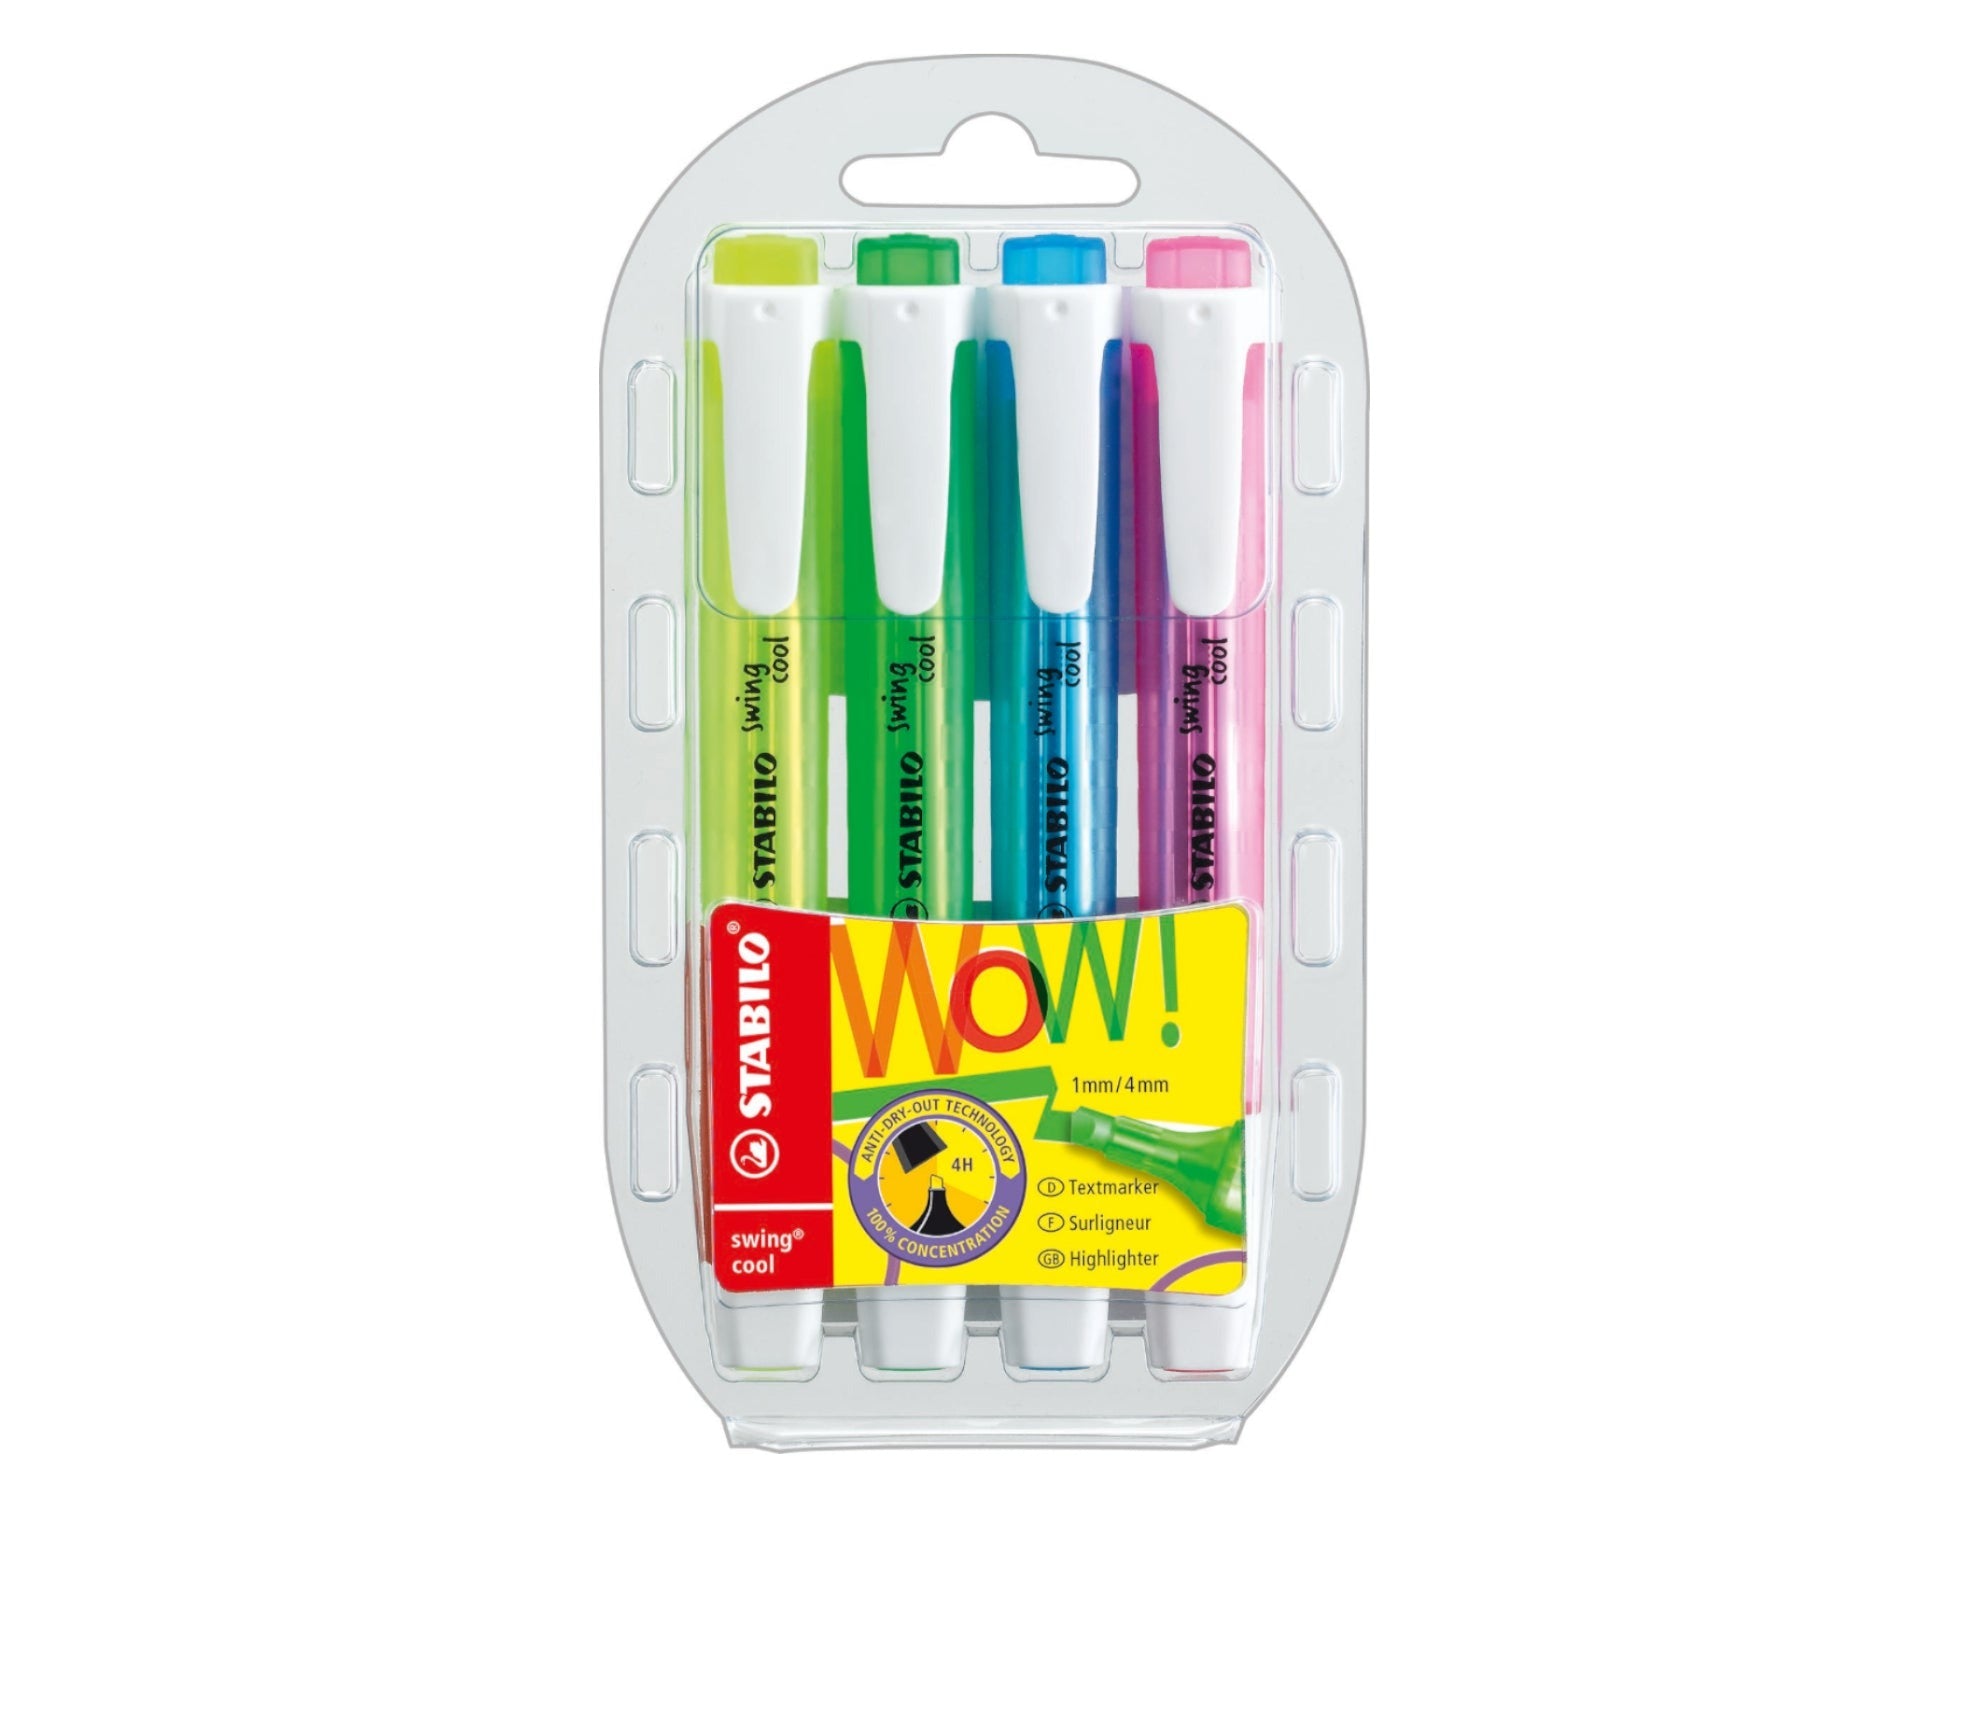 STABILO Swing Cool Highlighter - Set of 4 - Schwan-STABILO -Most colourful Stationery Shop